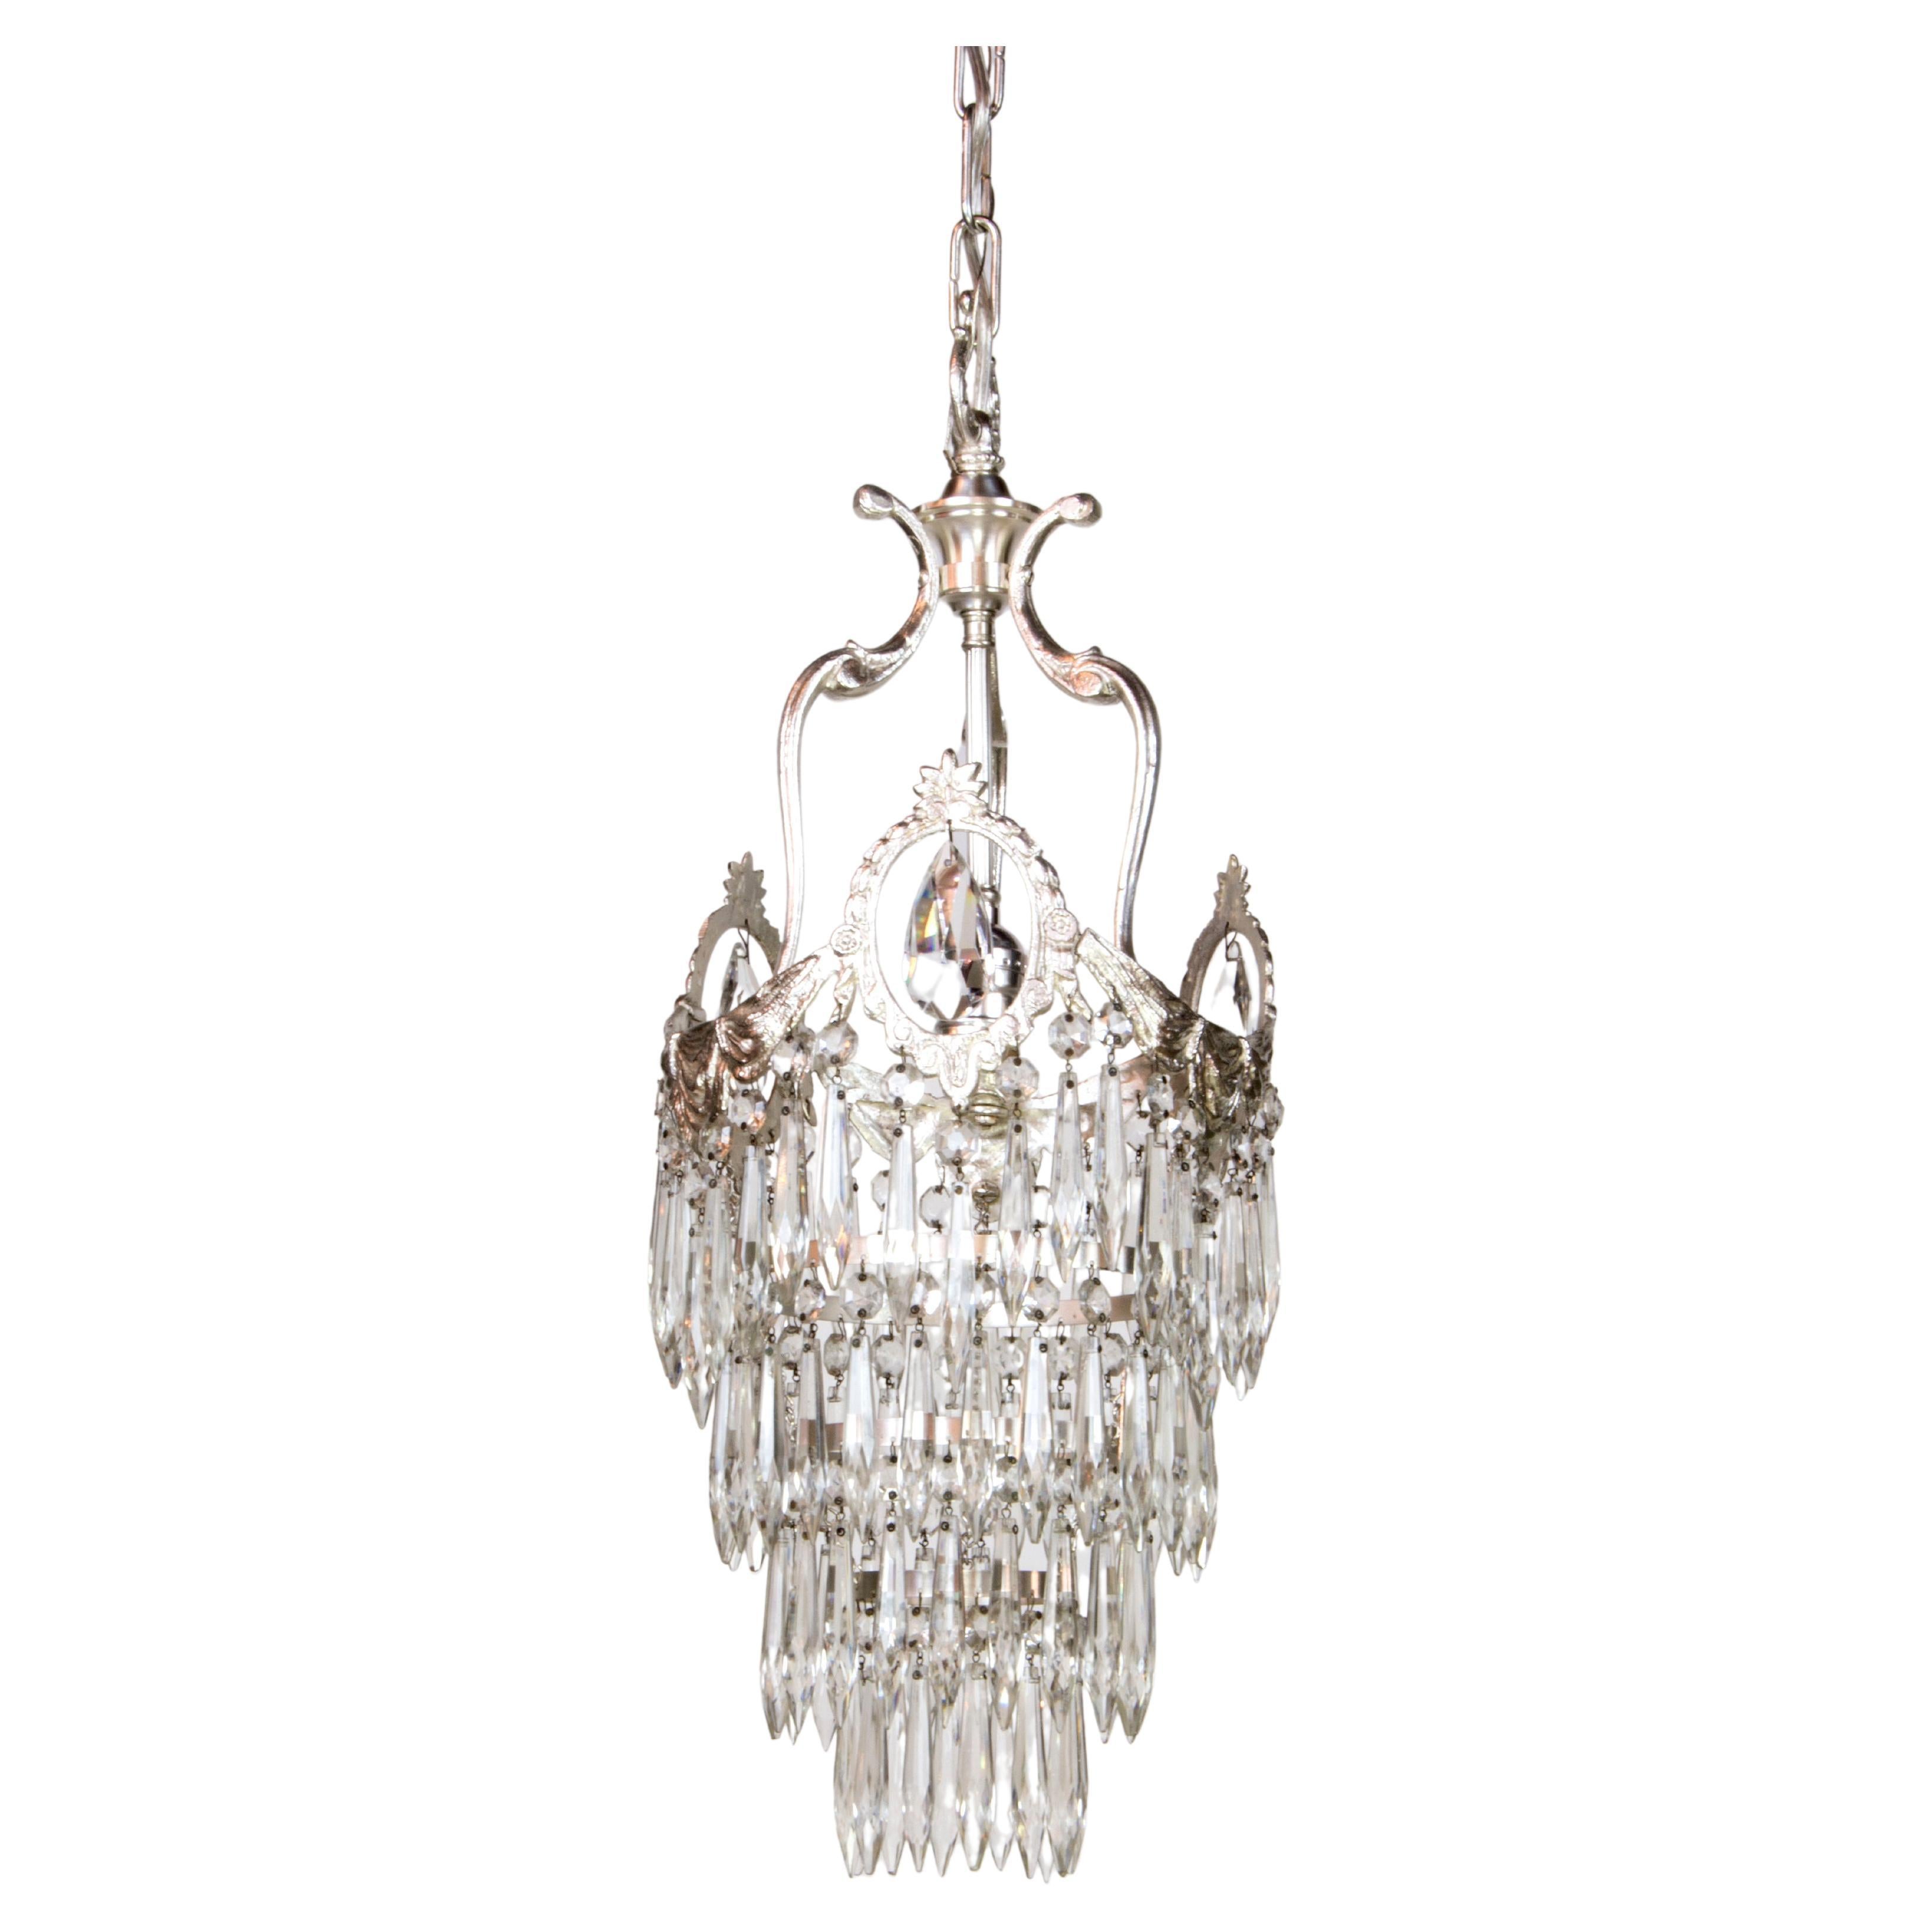 Early 20th Century Art Deco Tiered Silver and Crystal Pendant